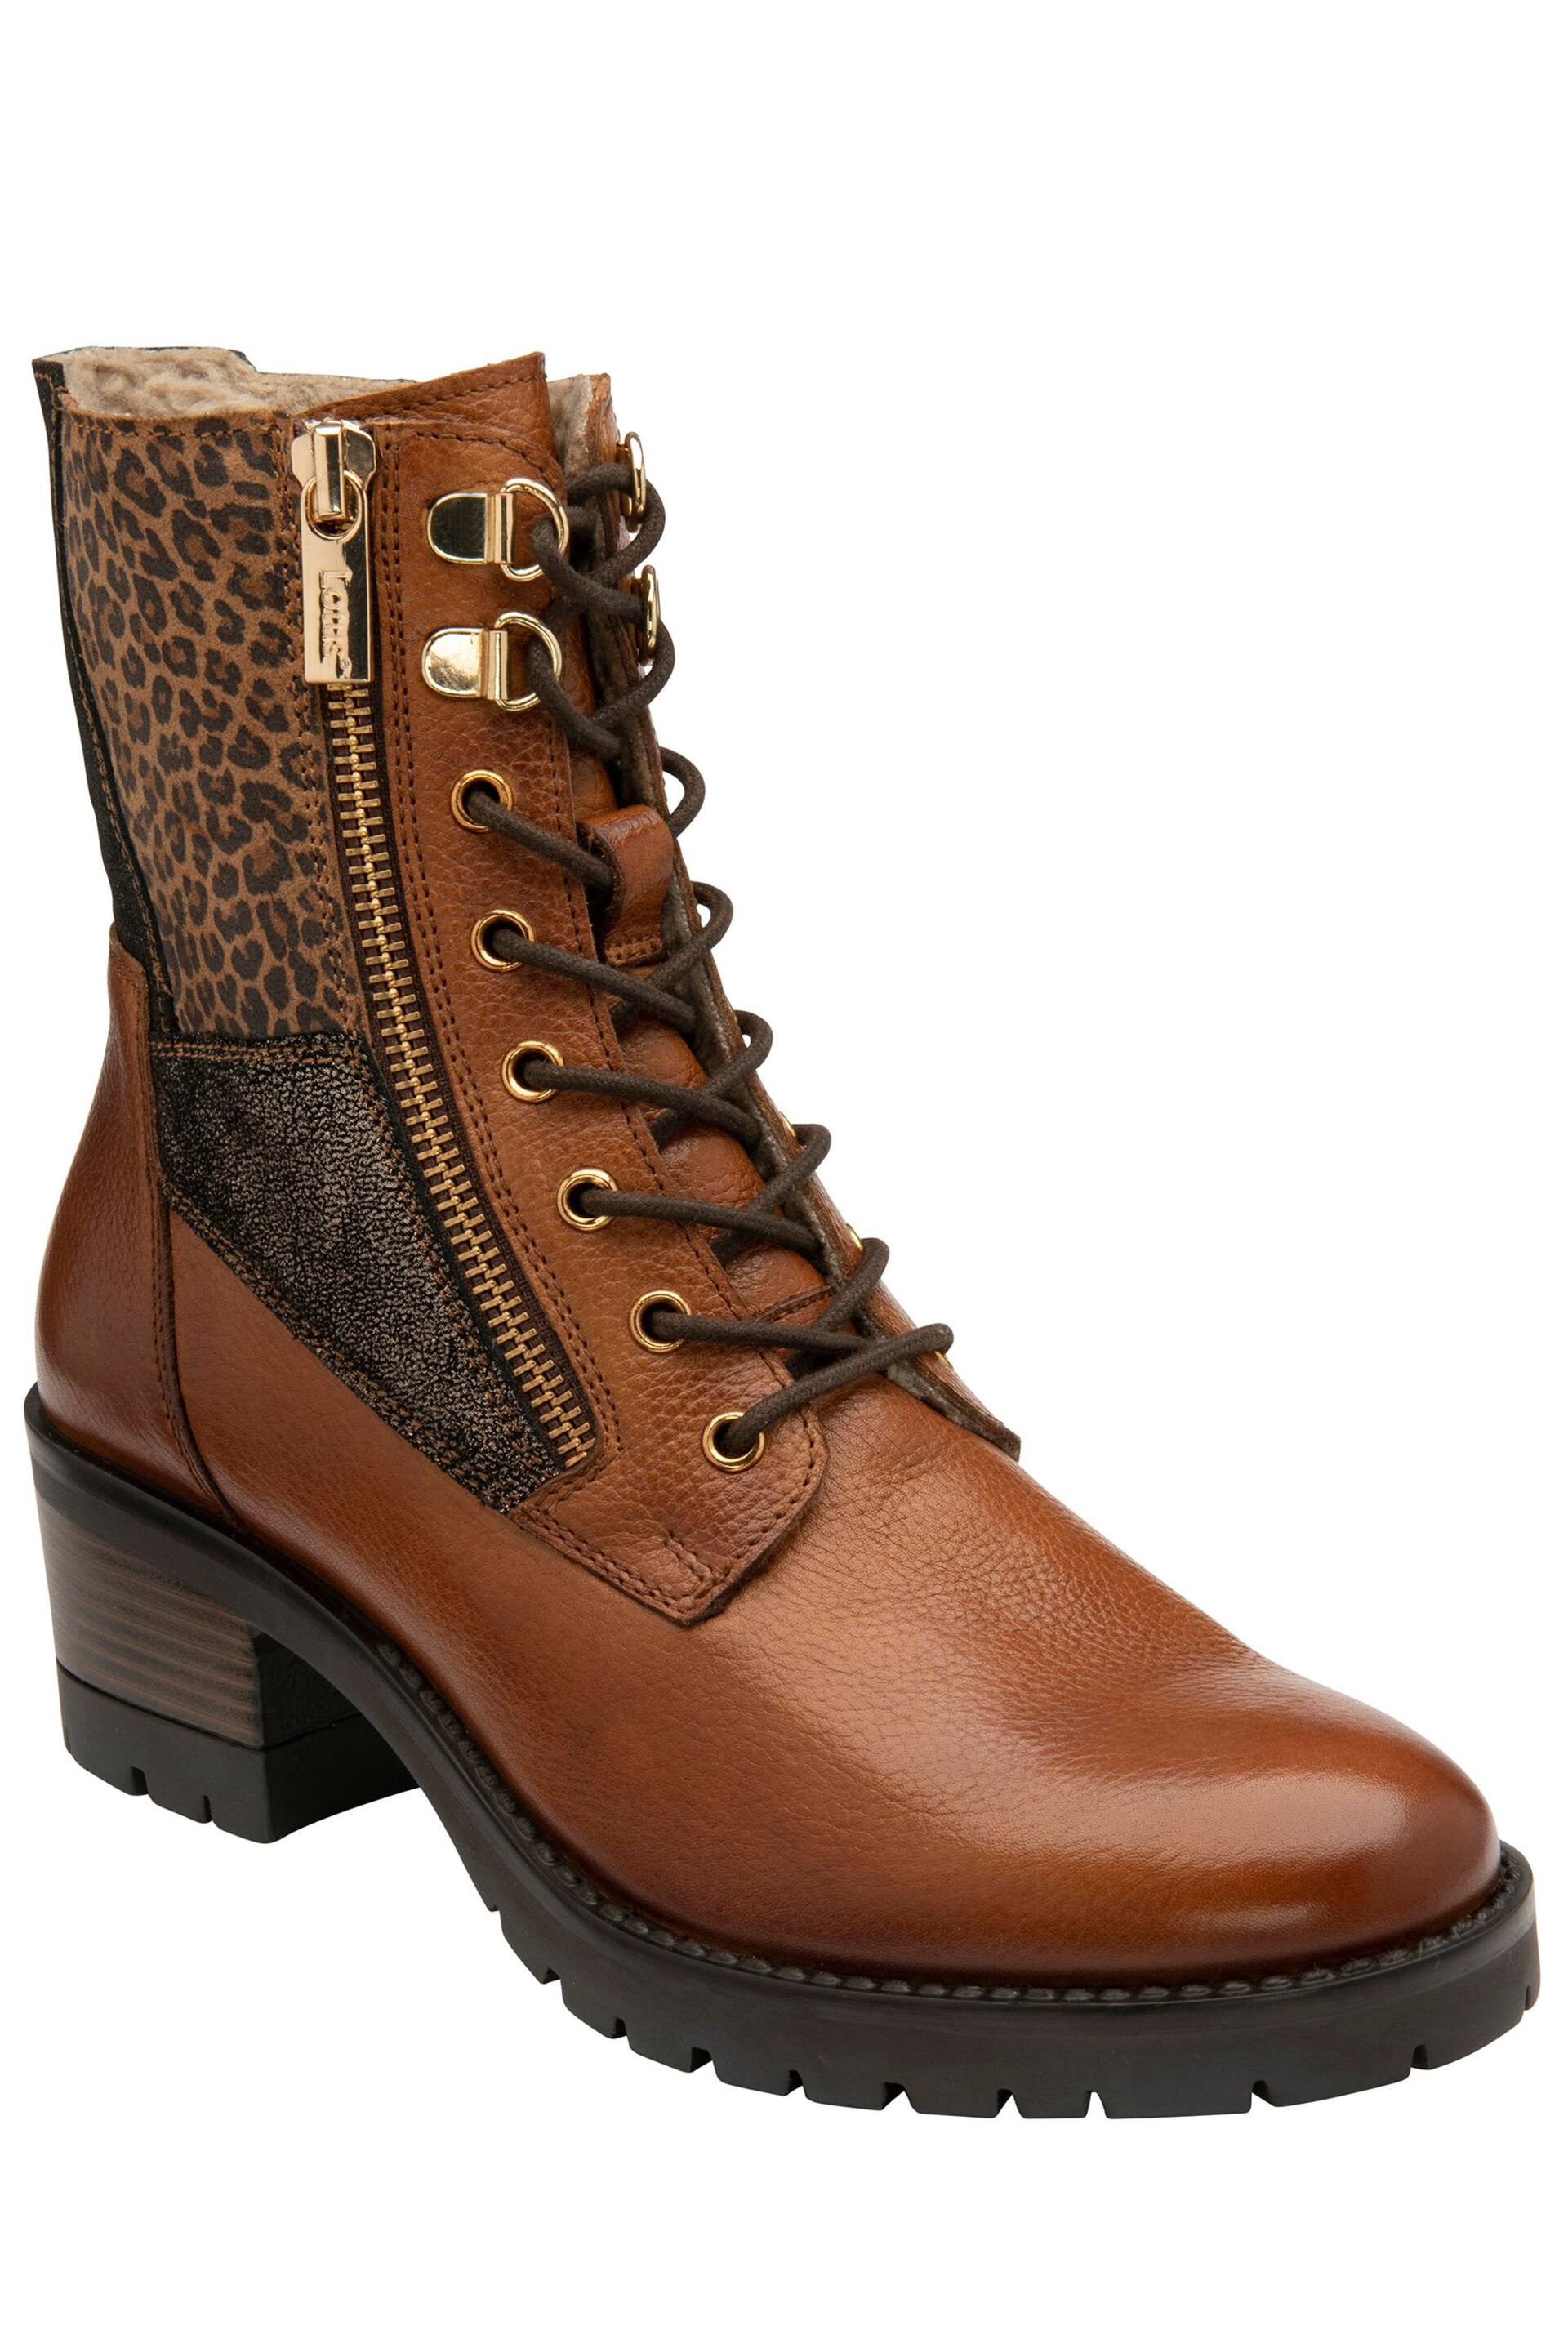 Lotus Light Brown Leather Zip-Up Ankle Boots - Image 1 of 4